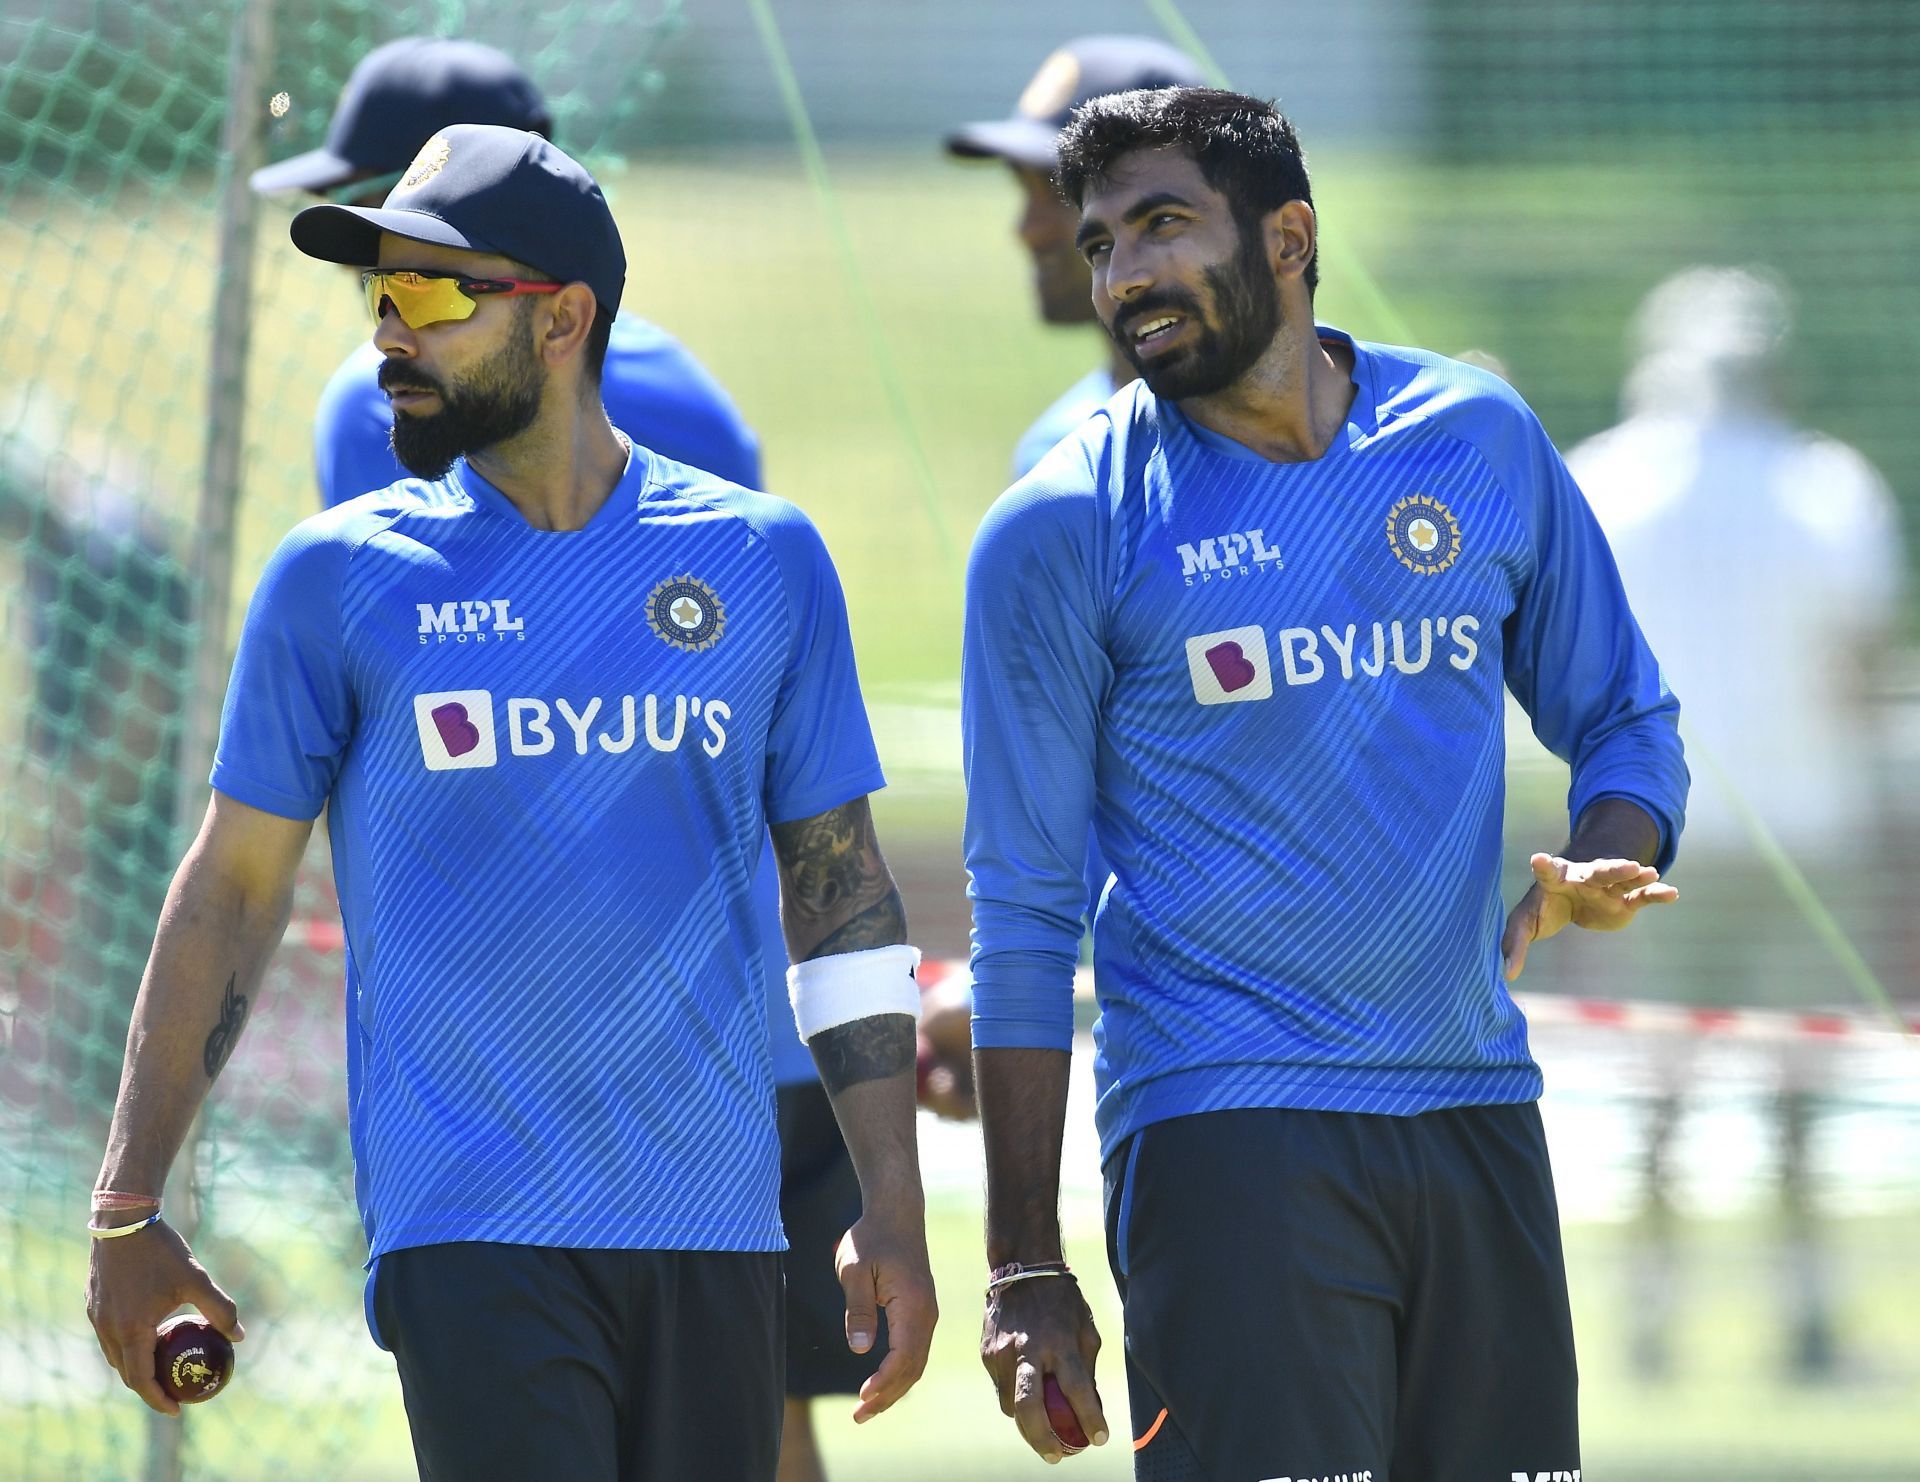 &lt;a href=&#039;https://www.sportskeeda.com/player/jasprit-bumrah&#039; target=&#039;_blank&#039; rel=&#039;noopener noreferrer&#039;&gt;Jasprit Bumrah&lt;/a&gt; has been appointed vice-captain for the three-match ODI series vs South Africa